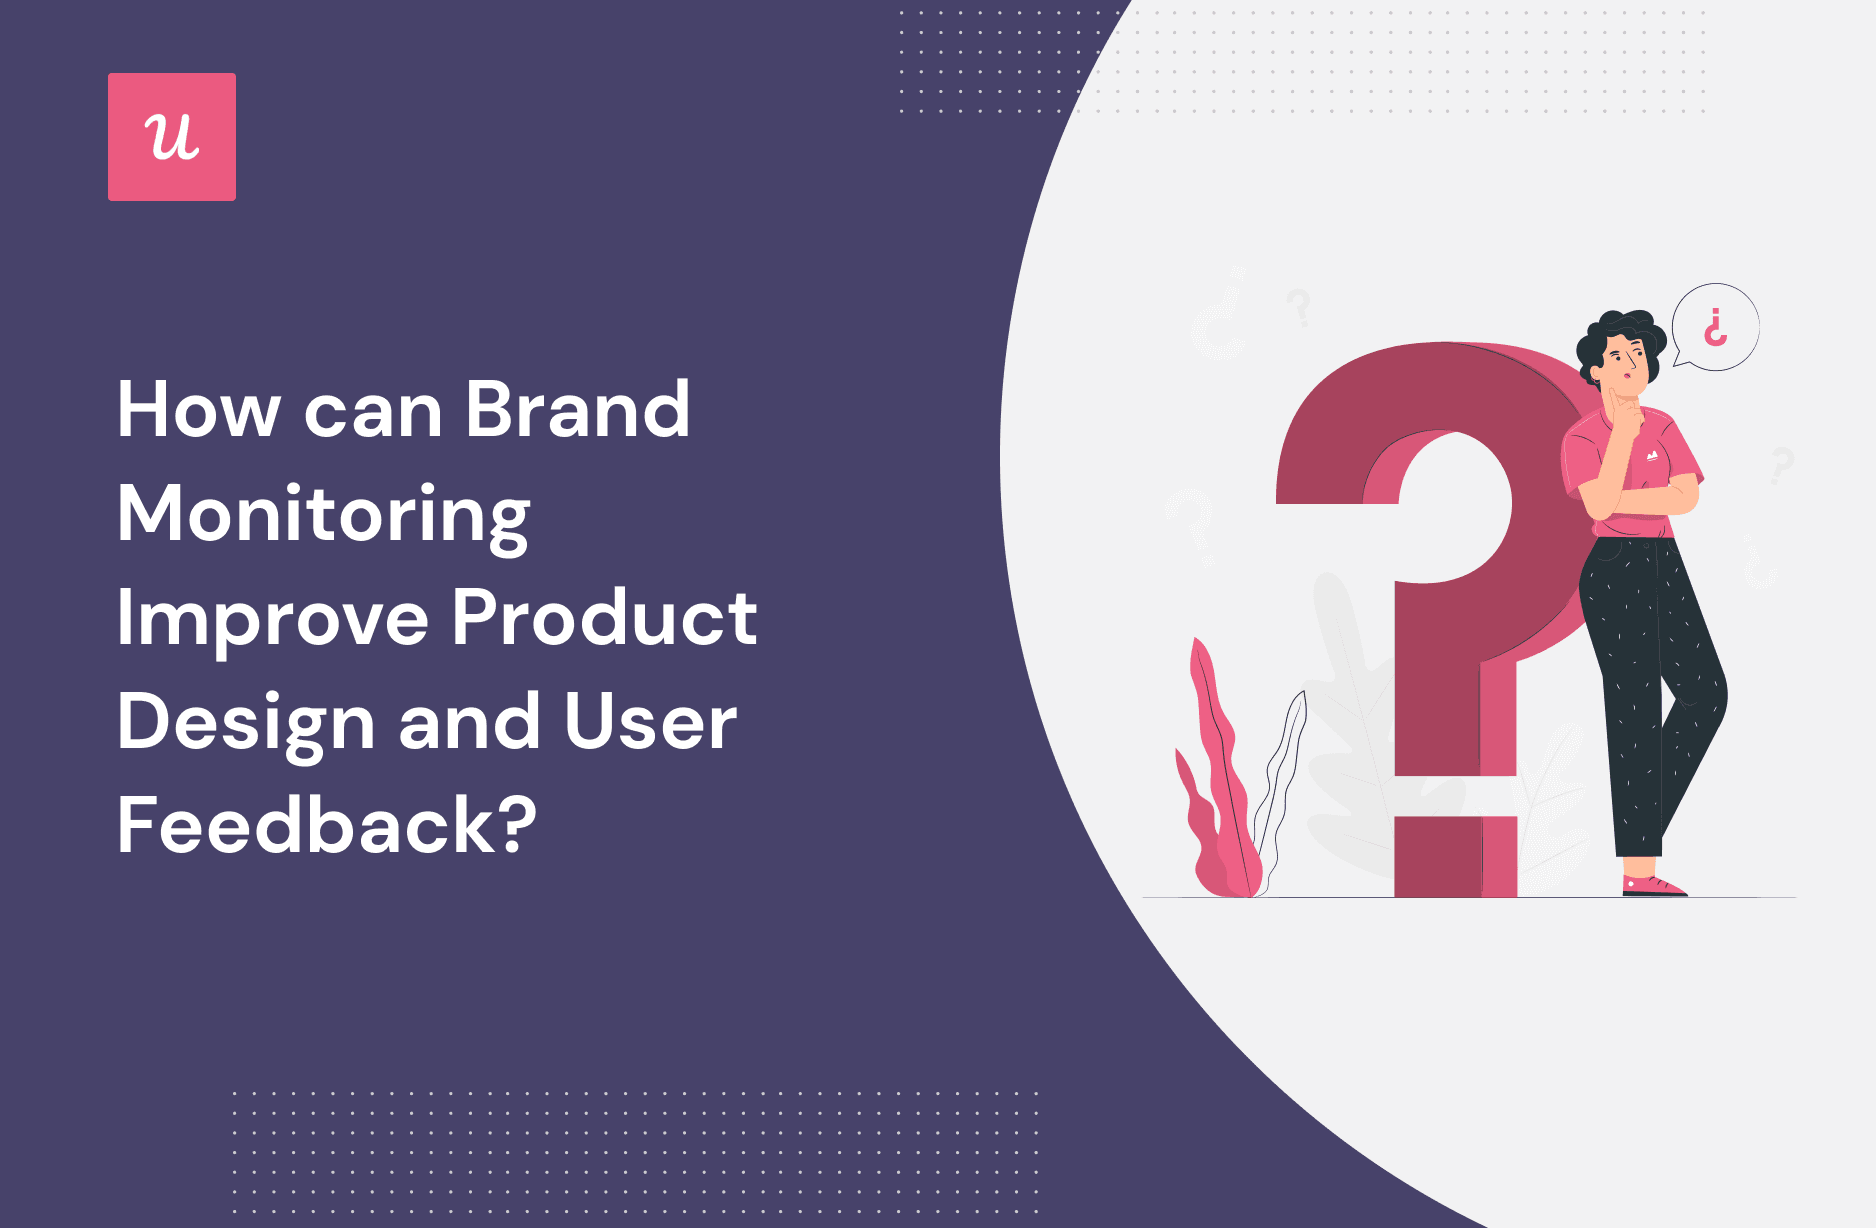 How Can Brand Monitoring Improve Product Design and User Feedback?